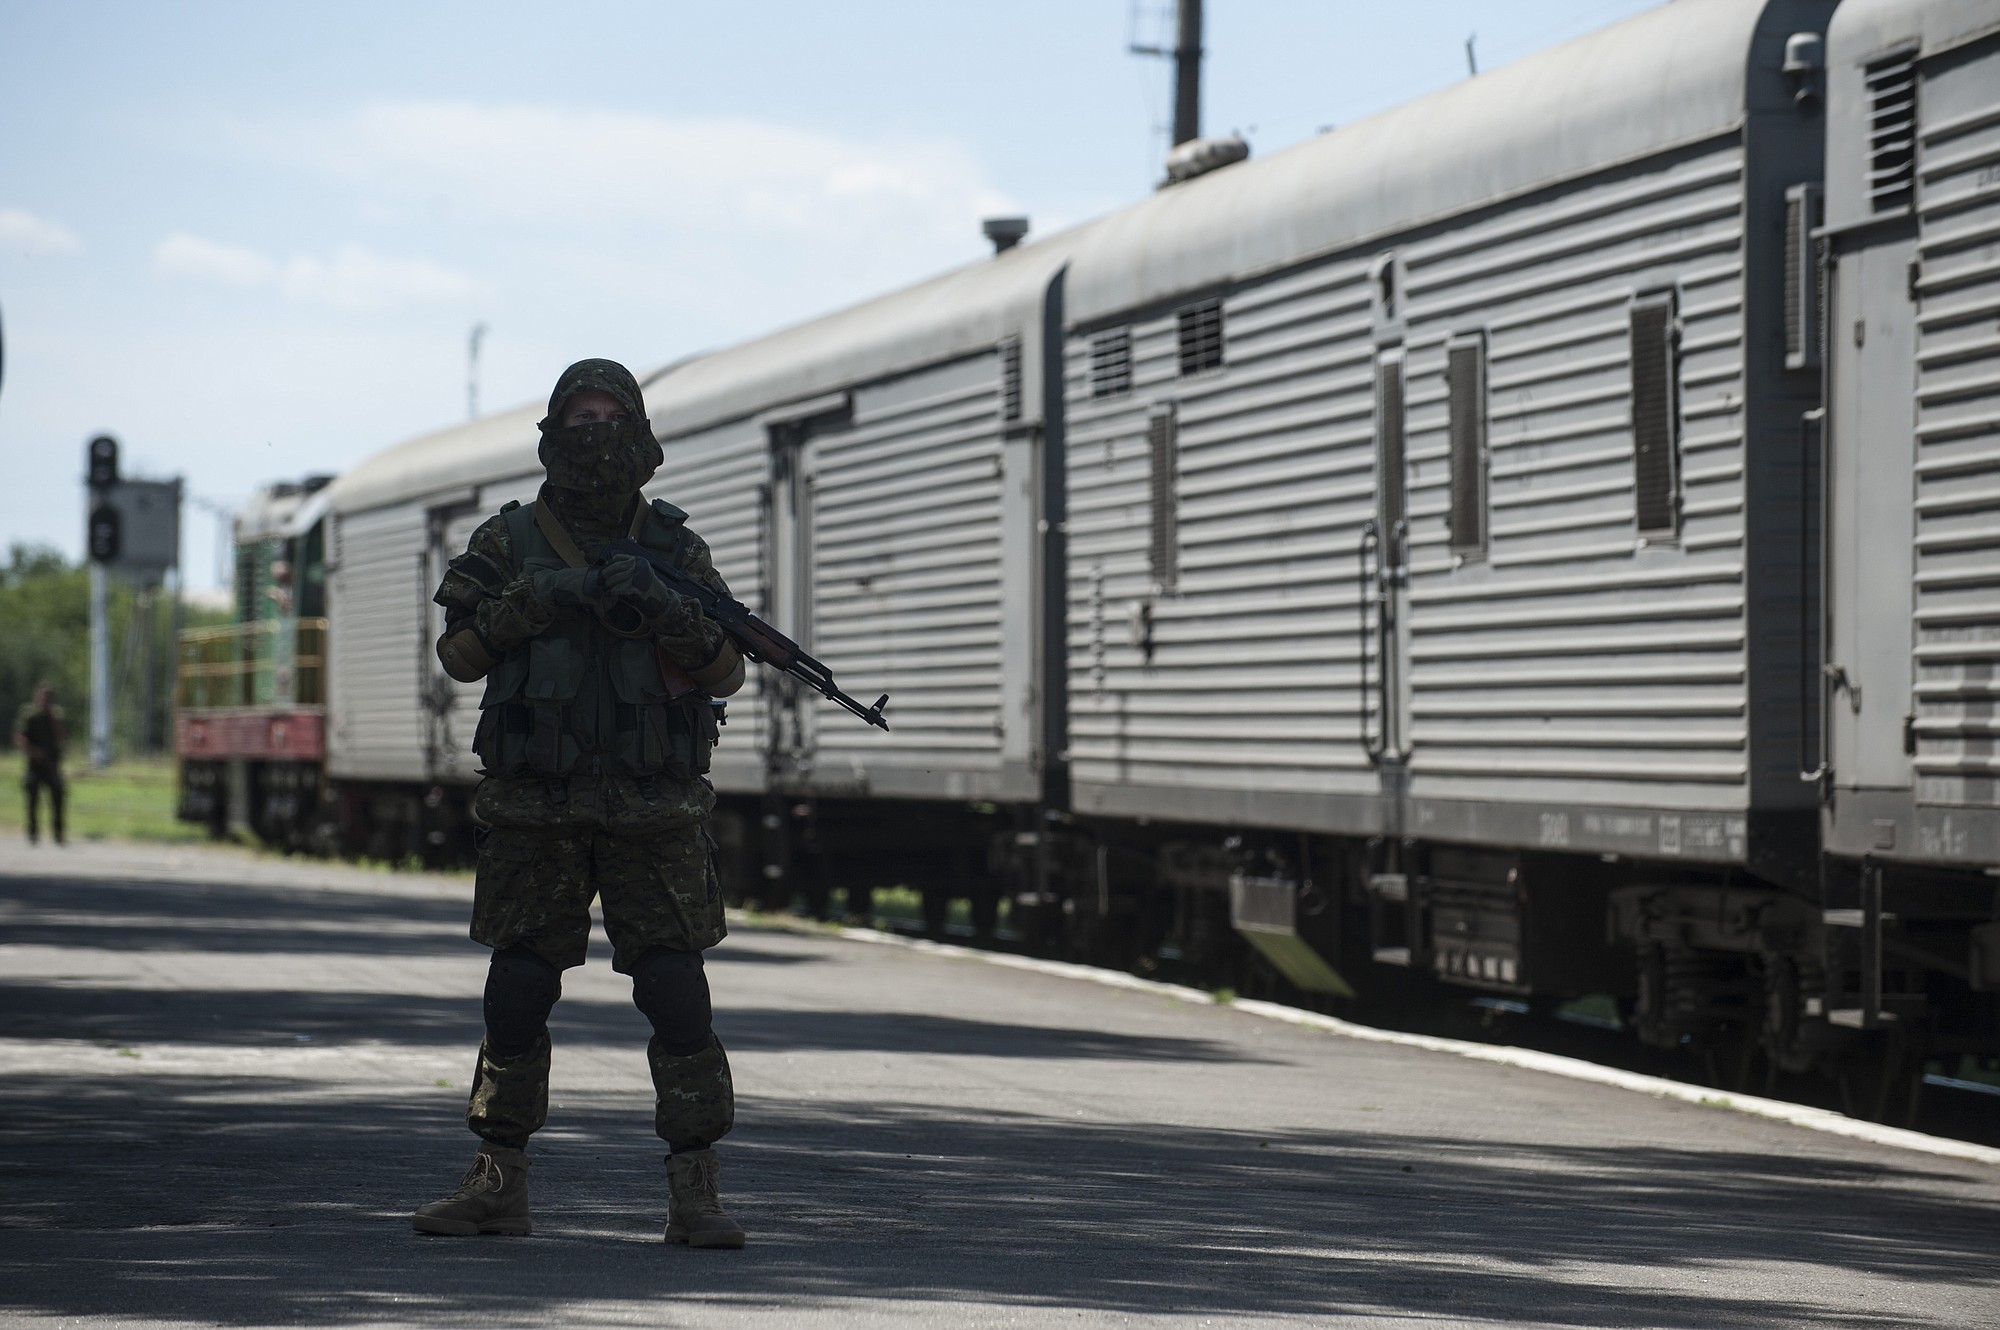 A pro-Russian armed fighter stands in guard on the platform Monday as a refrigerated train loaded with bodies of the passengers departs the station in Torez, eastern Ukraine, 9 miles from the crash site of Malaysia Airlines Flight 17. Another 21 bodies have been found in the sprawling fields of east Ukraine where Malaysia Airlines Flight 17 was downed last week, killing all 298 people aboard.